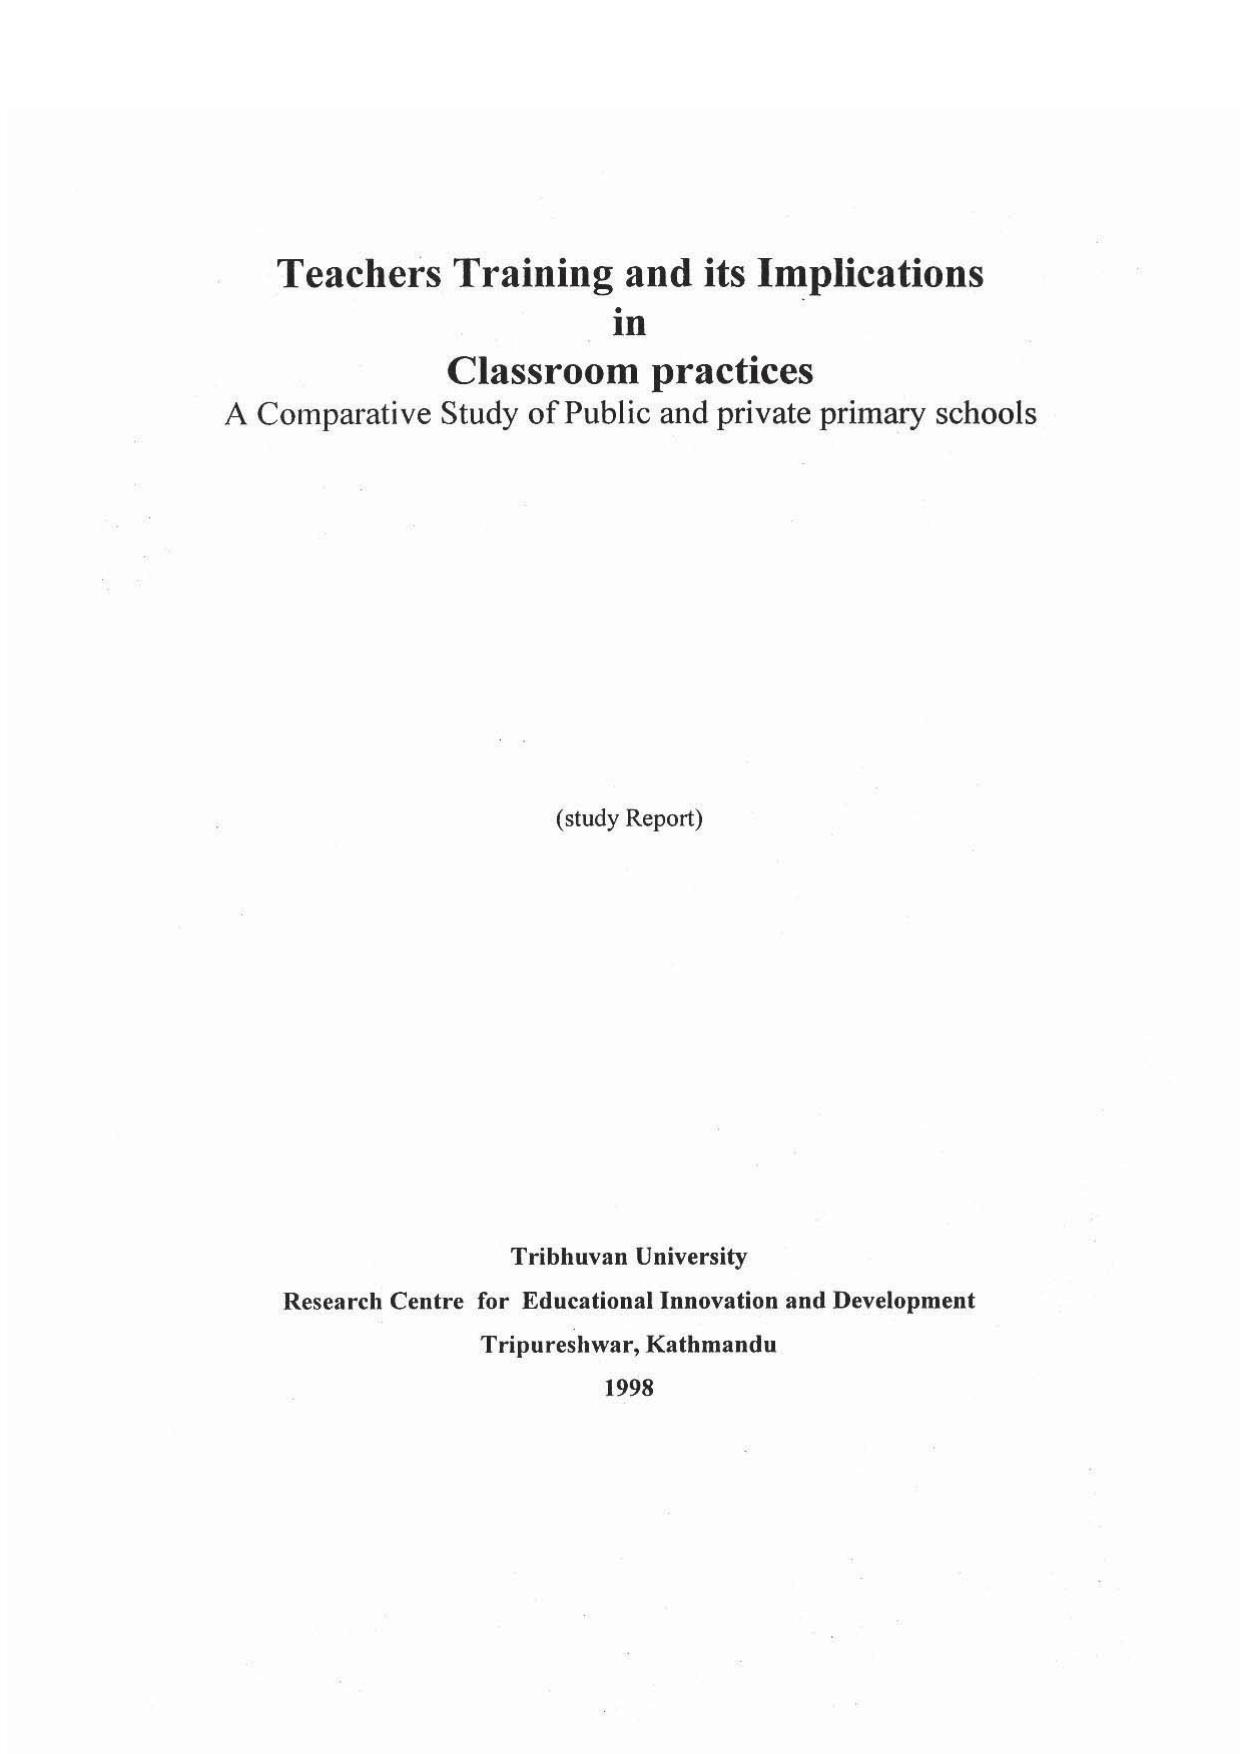 Teachers Training And Its Implications in Classroom Practices